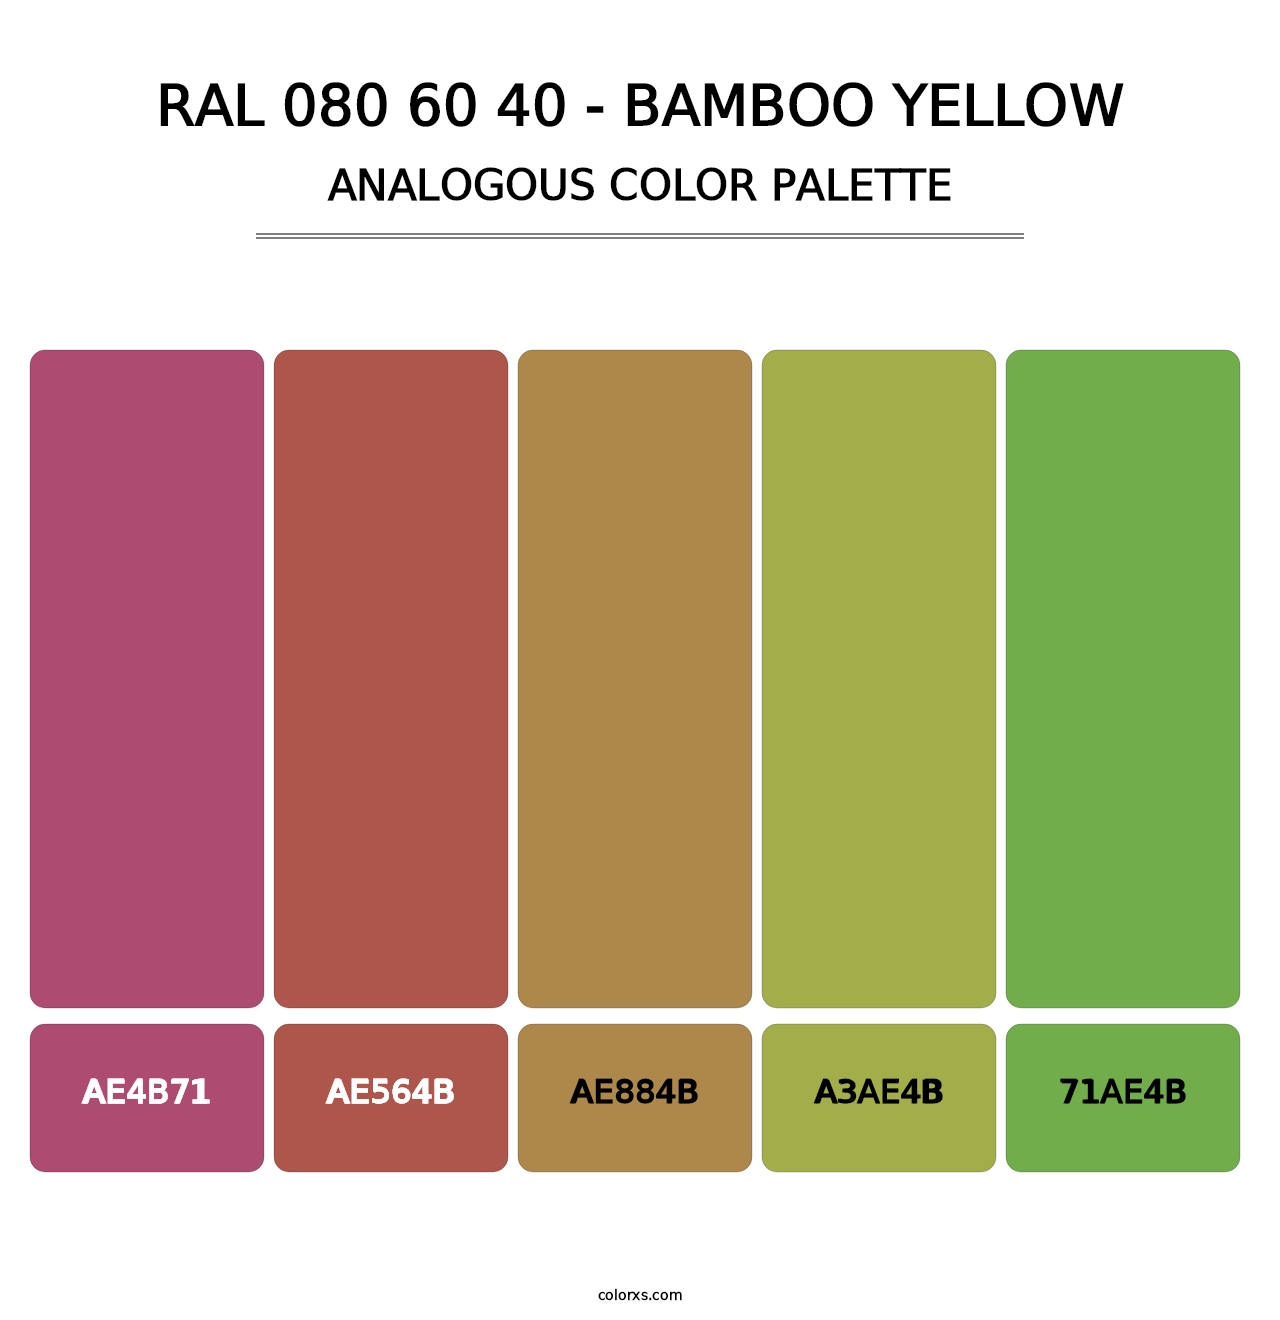 RAL 080 60 40 - Bamboo Yellow - Analogous Color Palette